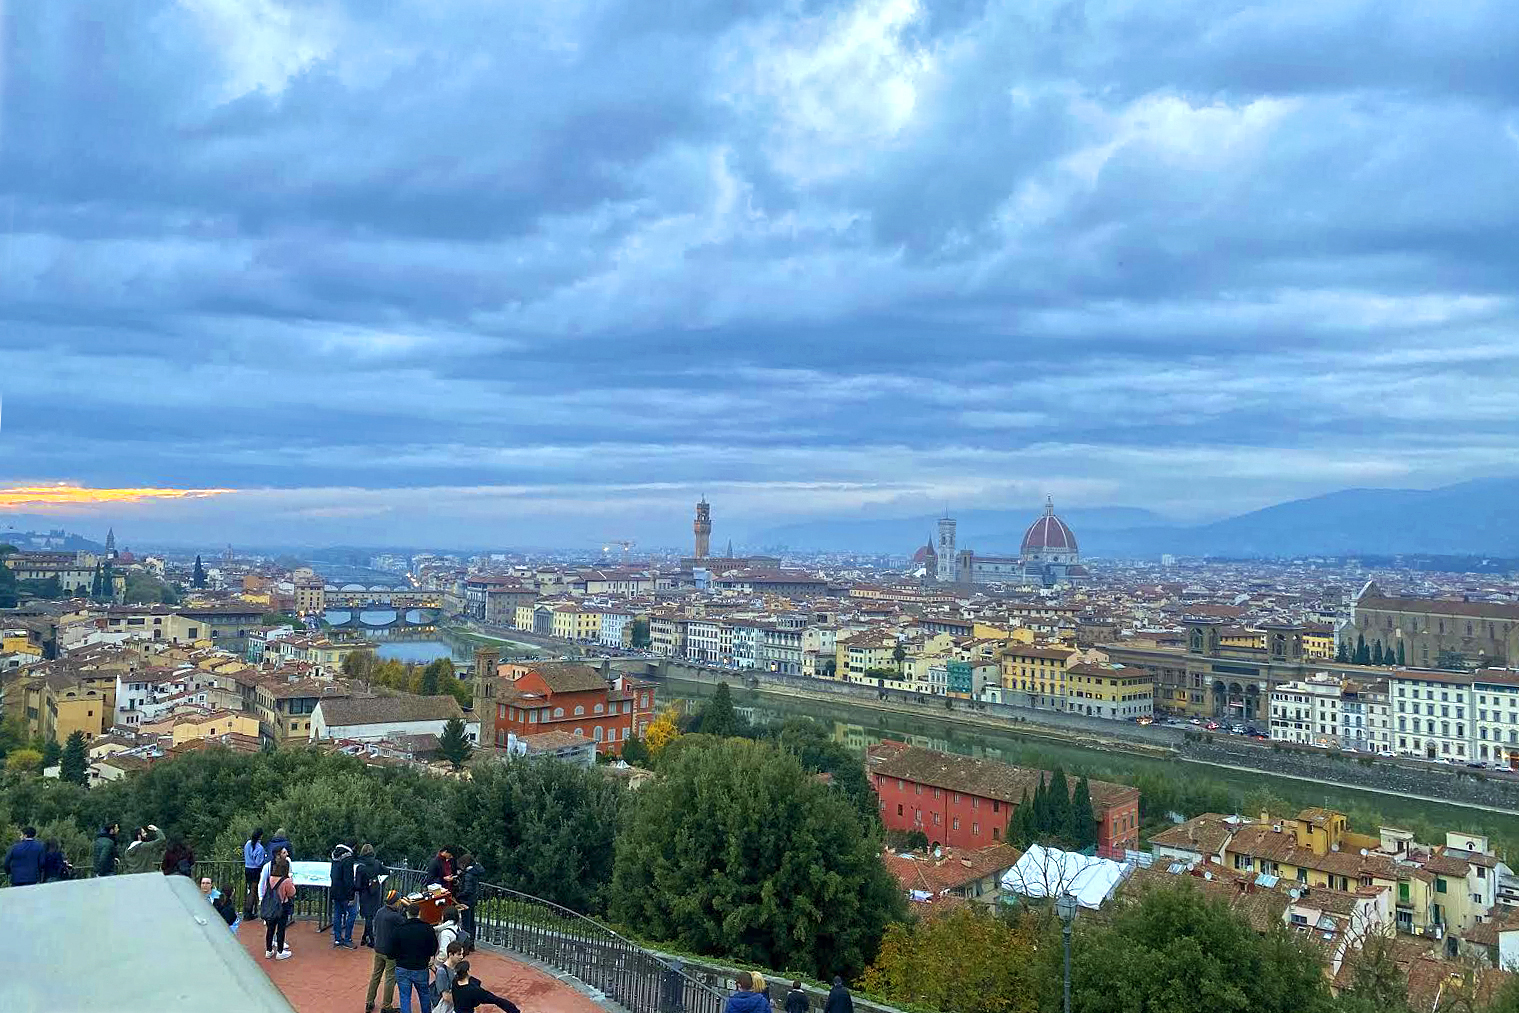 The Florence skyline under a dramatic cloud-filled sky